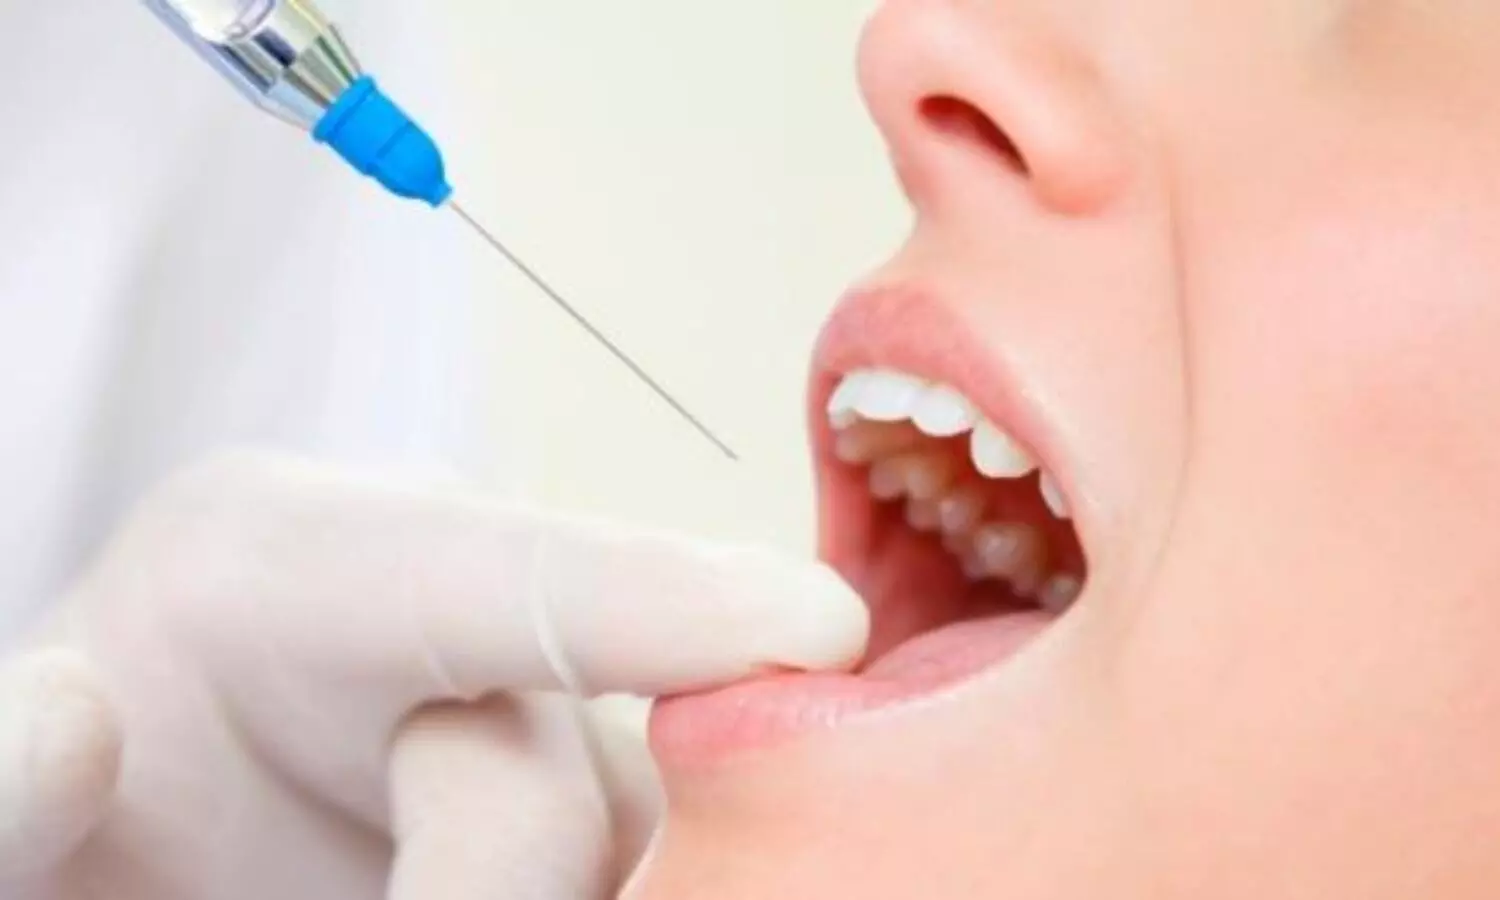 Articaine - a safe and efficacious local anaesthetic for all routine dental procedures: Study